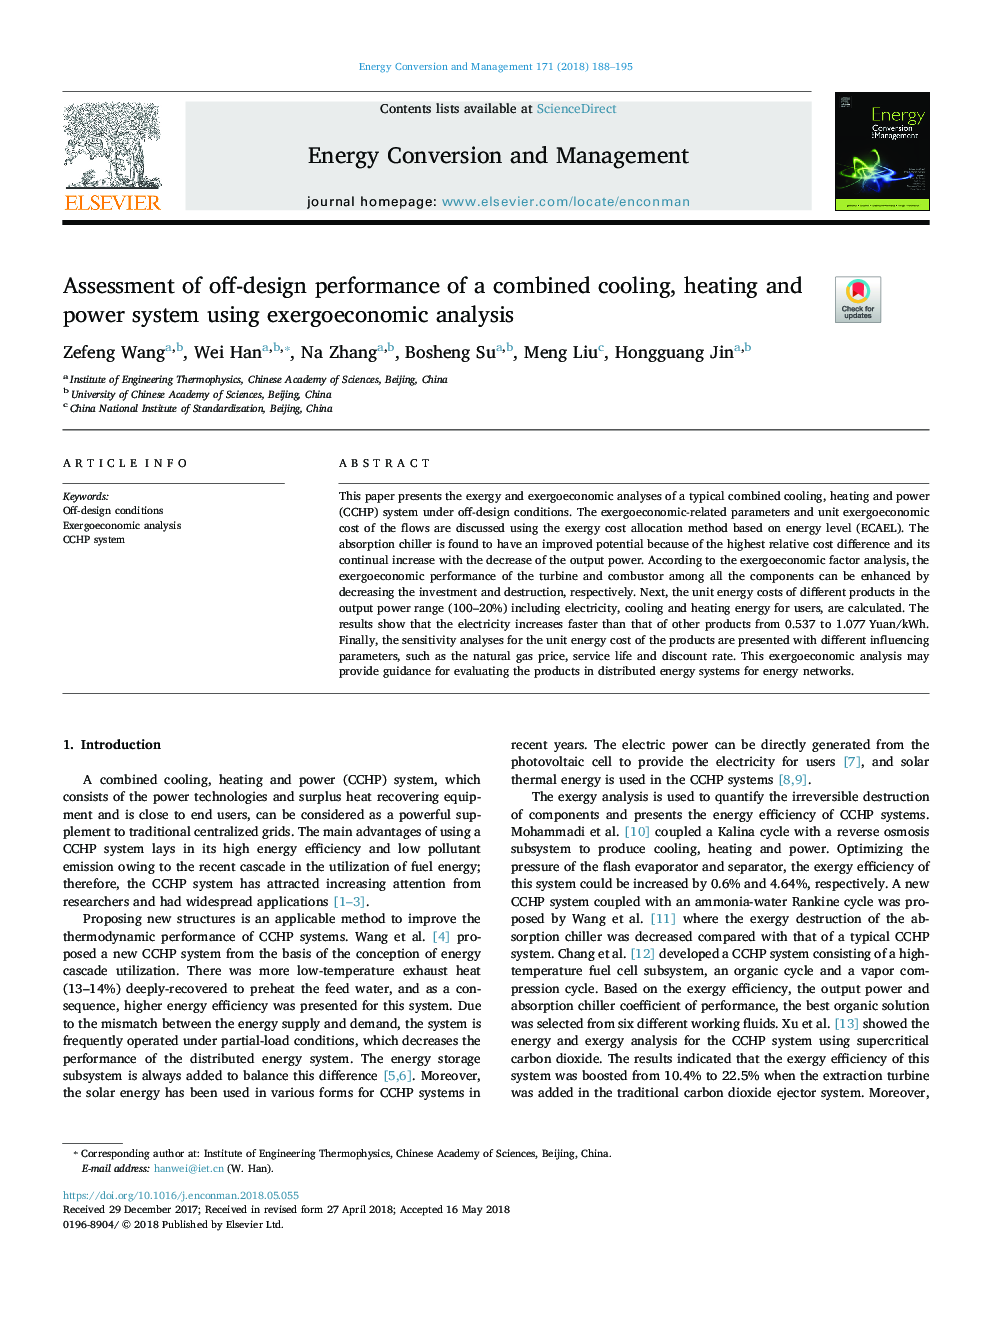 Assessment of off-design performance of a combined cooling, heating and power system using exergoeconomic analysis